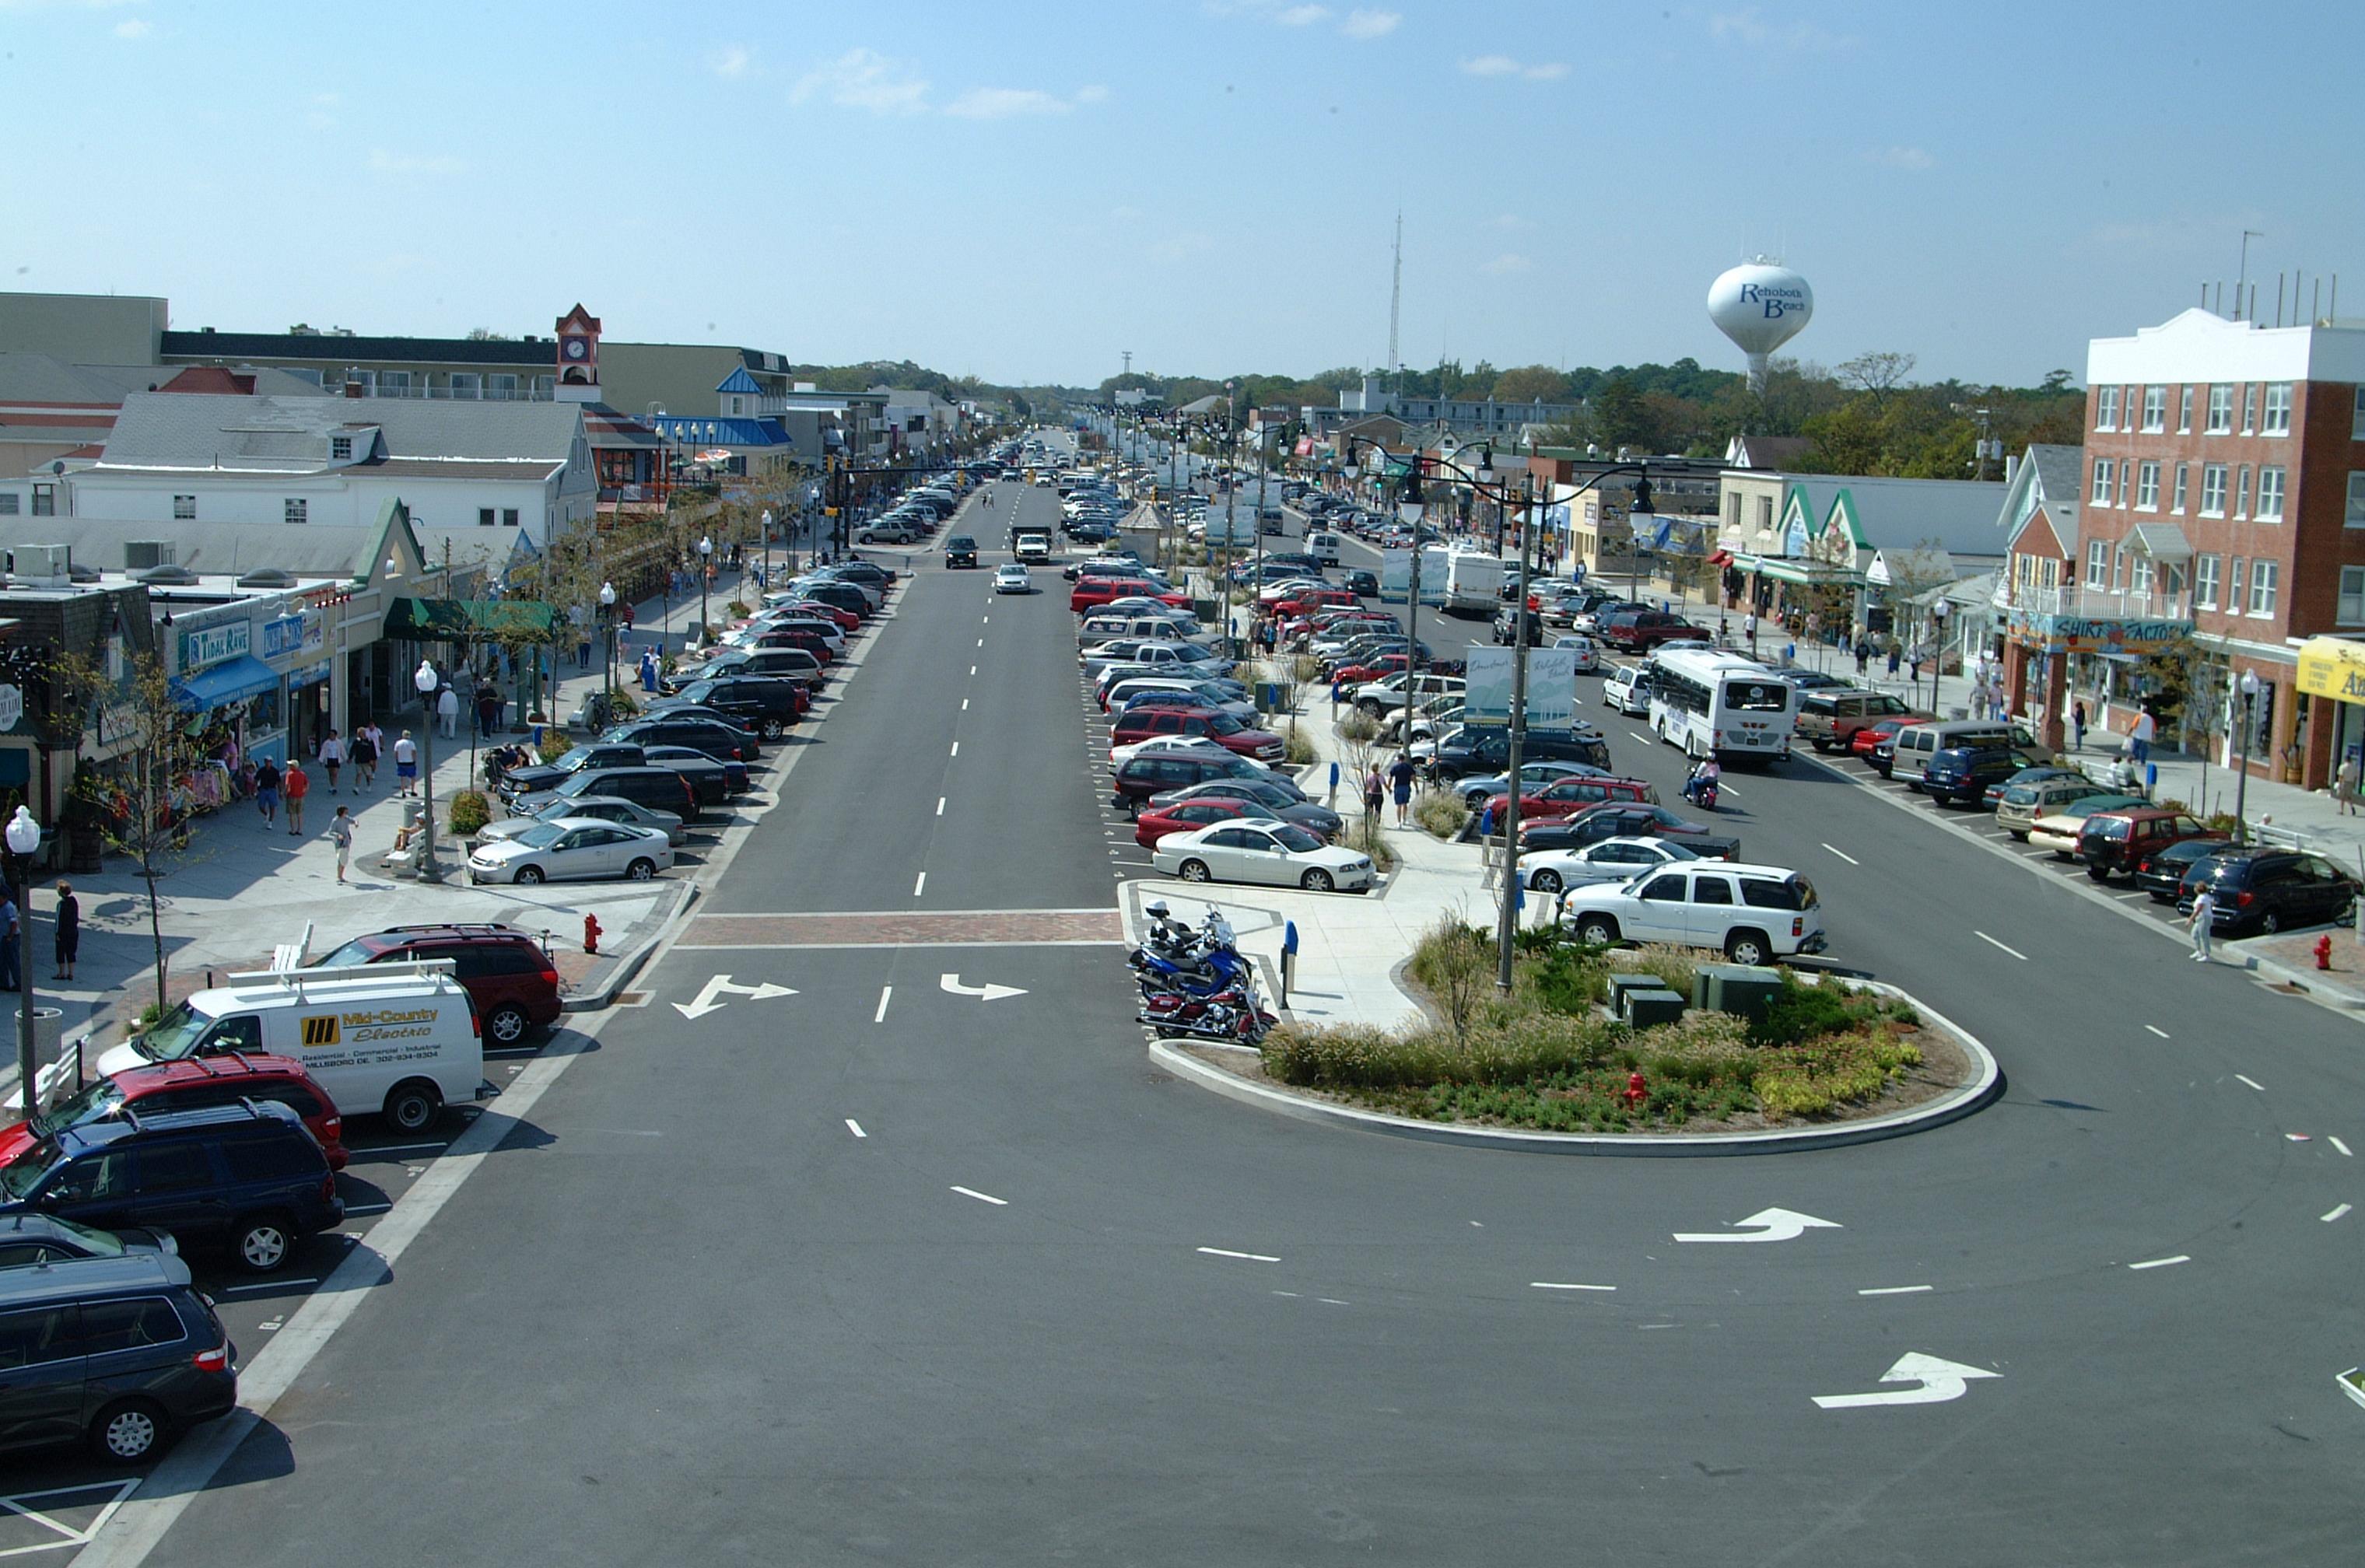 00_0189_000_N376 Guide to Parking in Downtown Rehoboth